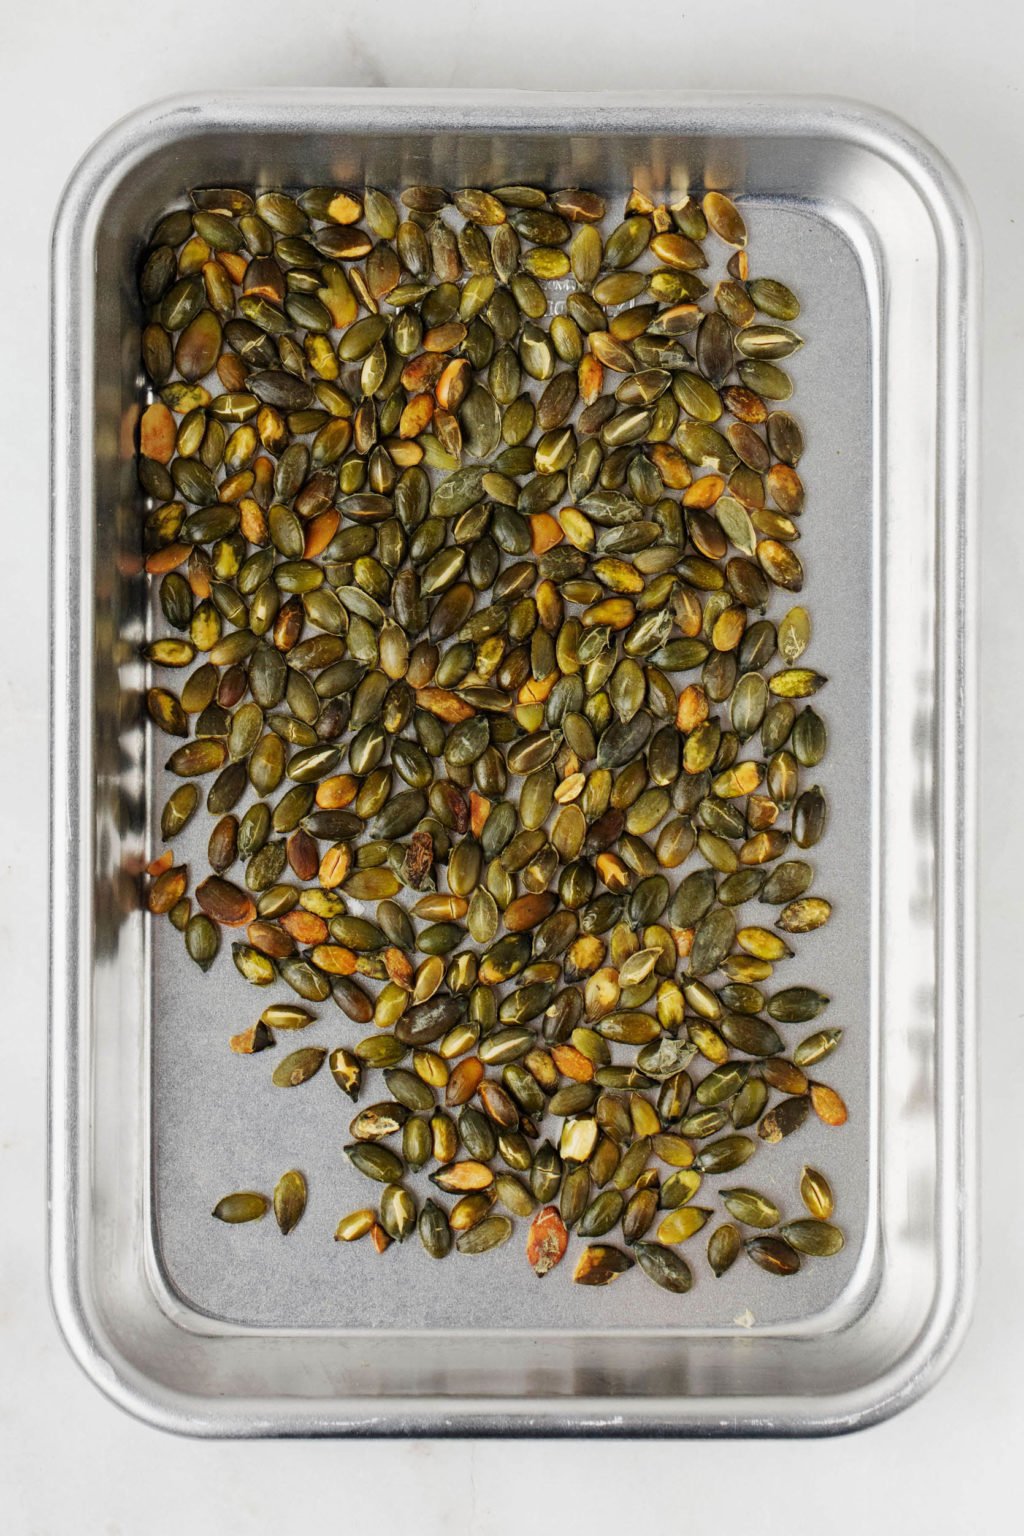 A rimmed baking sheet has been used to roast pepitas.